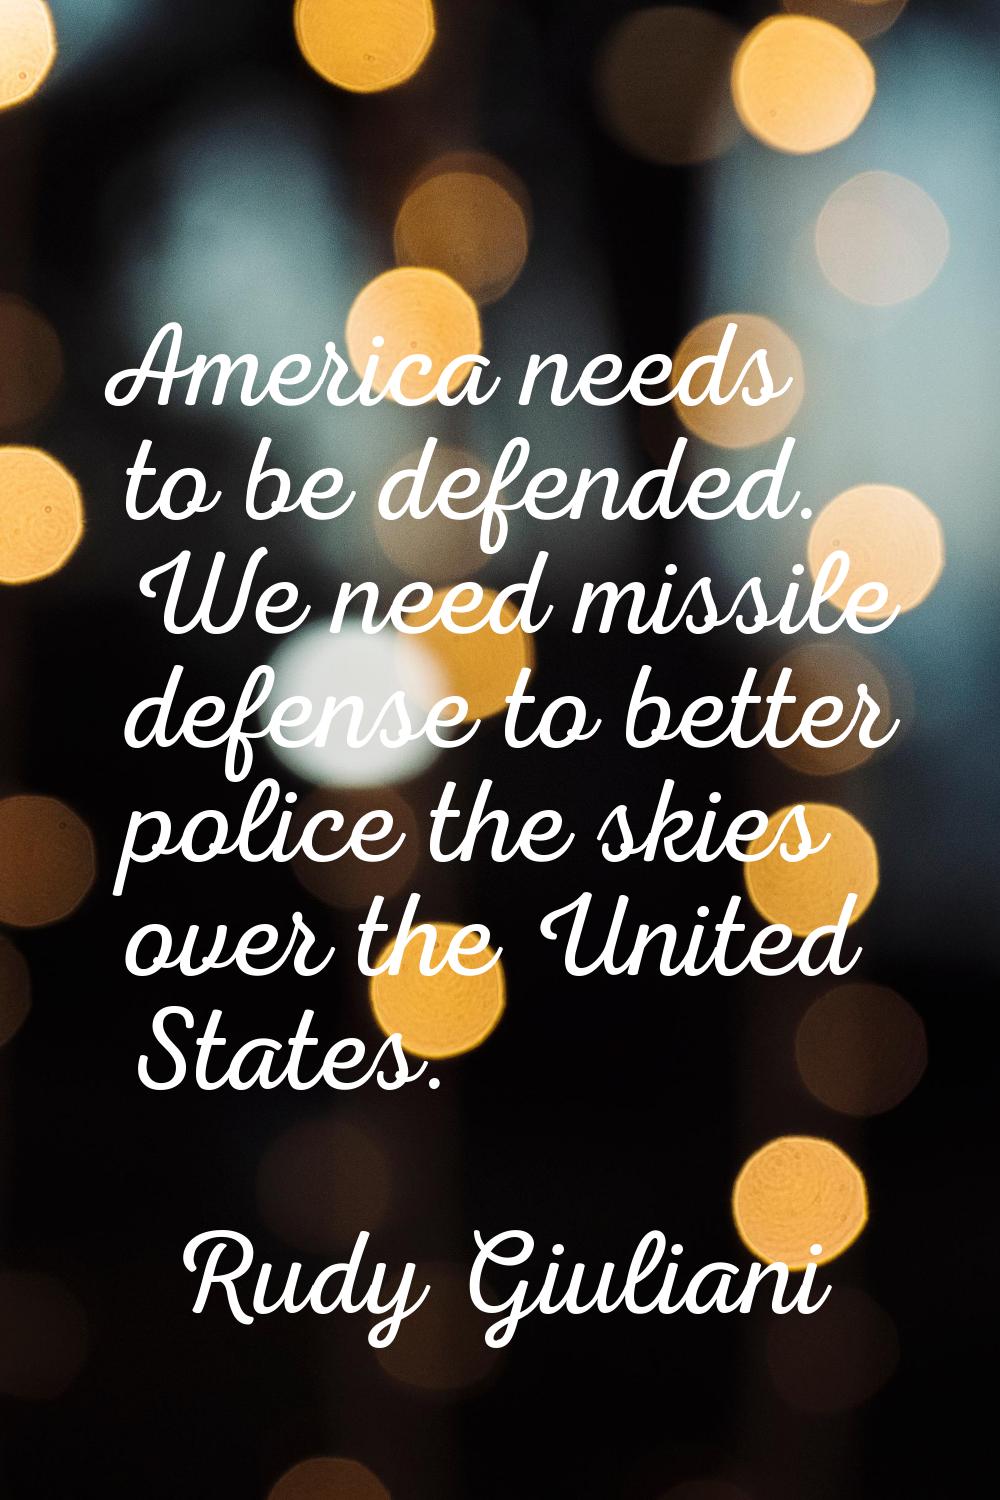 America needs to be defended. We need missile defense to better police the skies over the United St